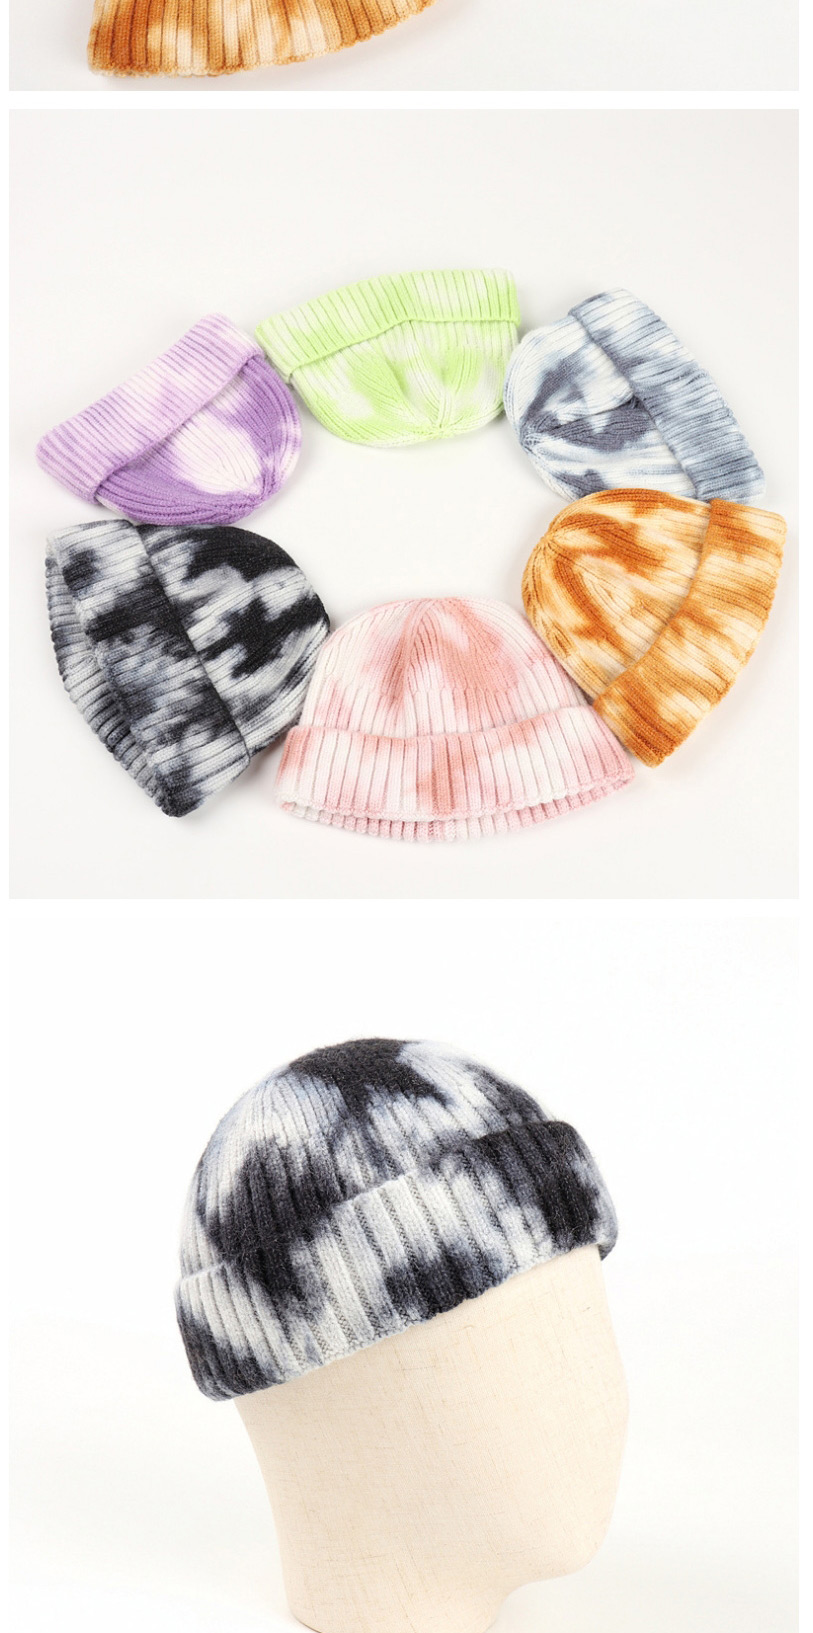 Fashion Caramel Tie-dyed Mohair Curled Knitted Beanie Hat,Knitting Wool Hats